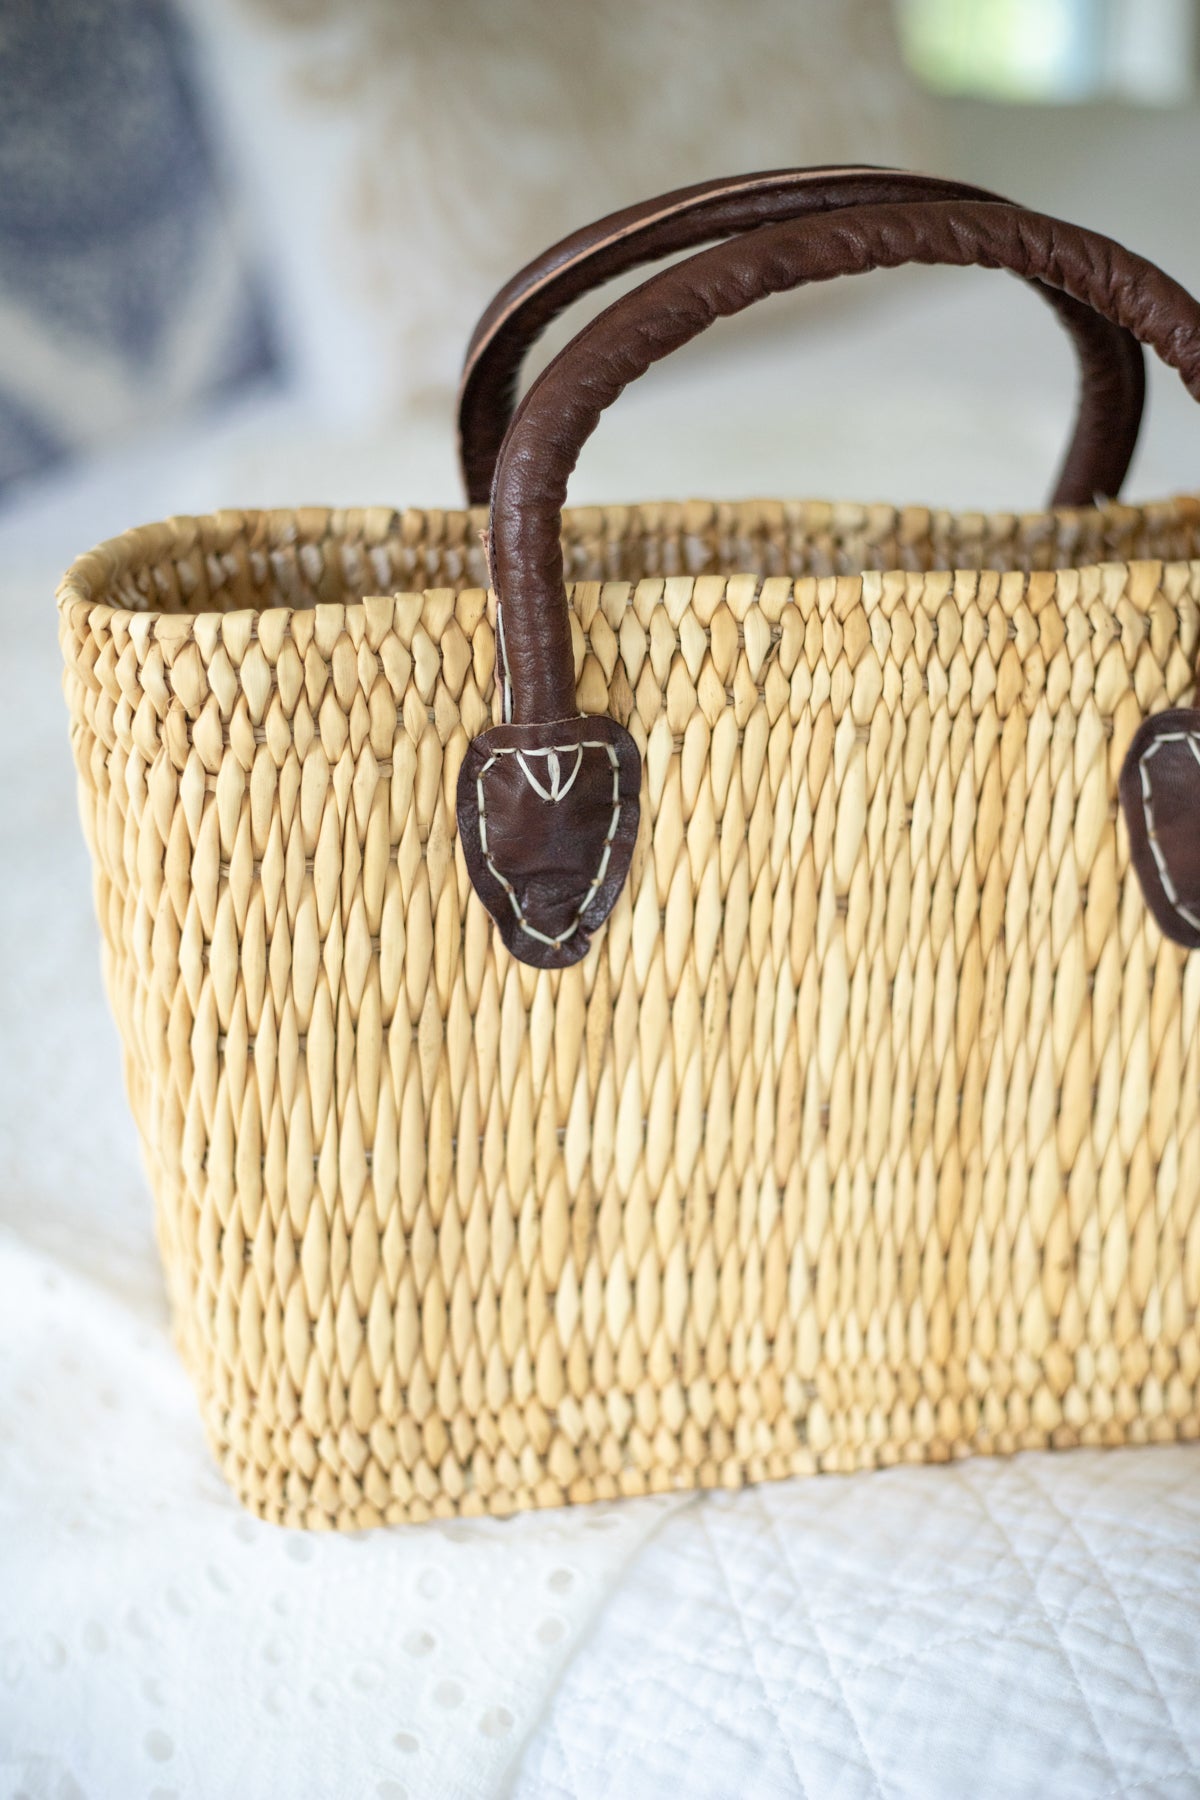 Big woven straw bag, French basket with leather handles, Straw